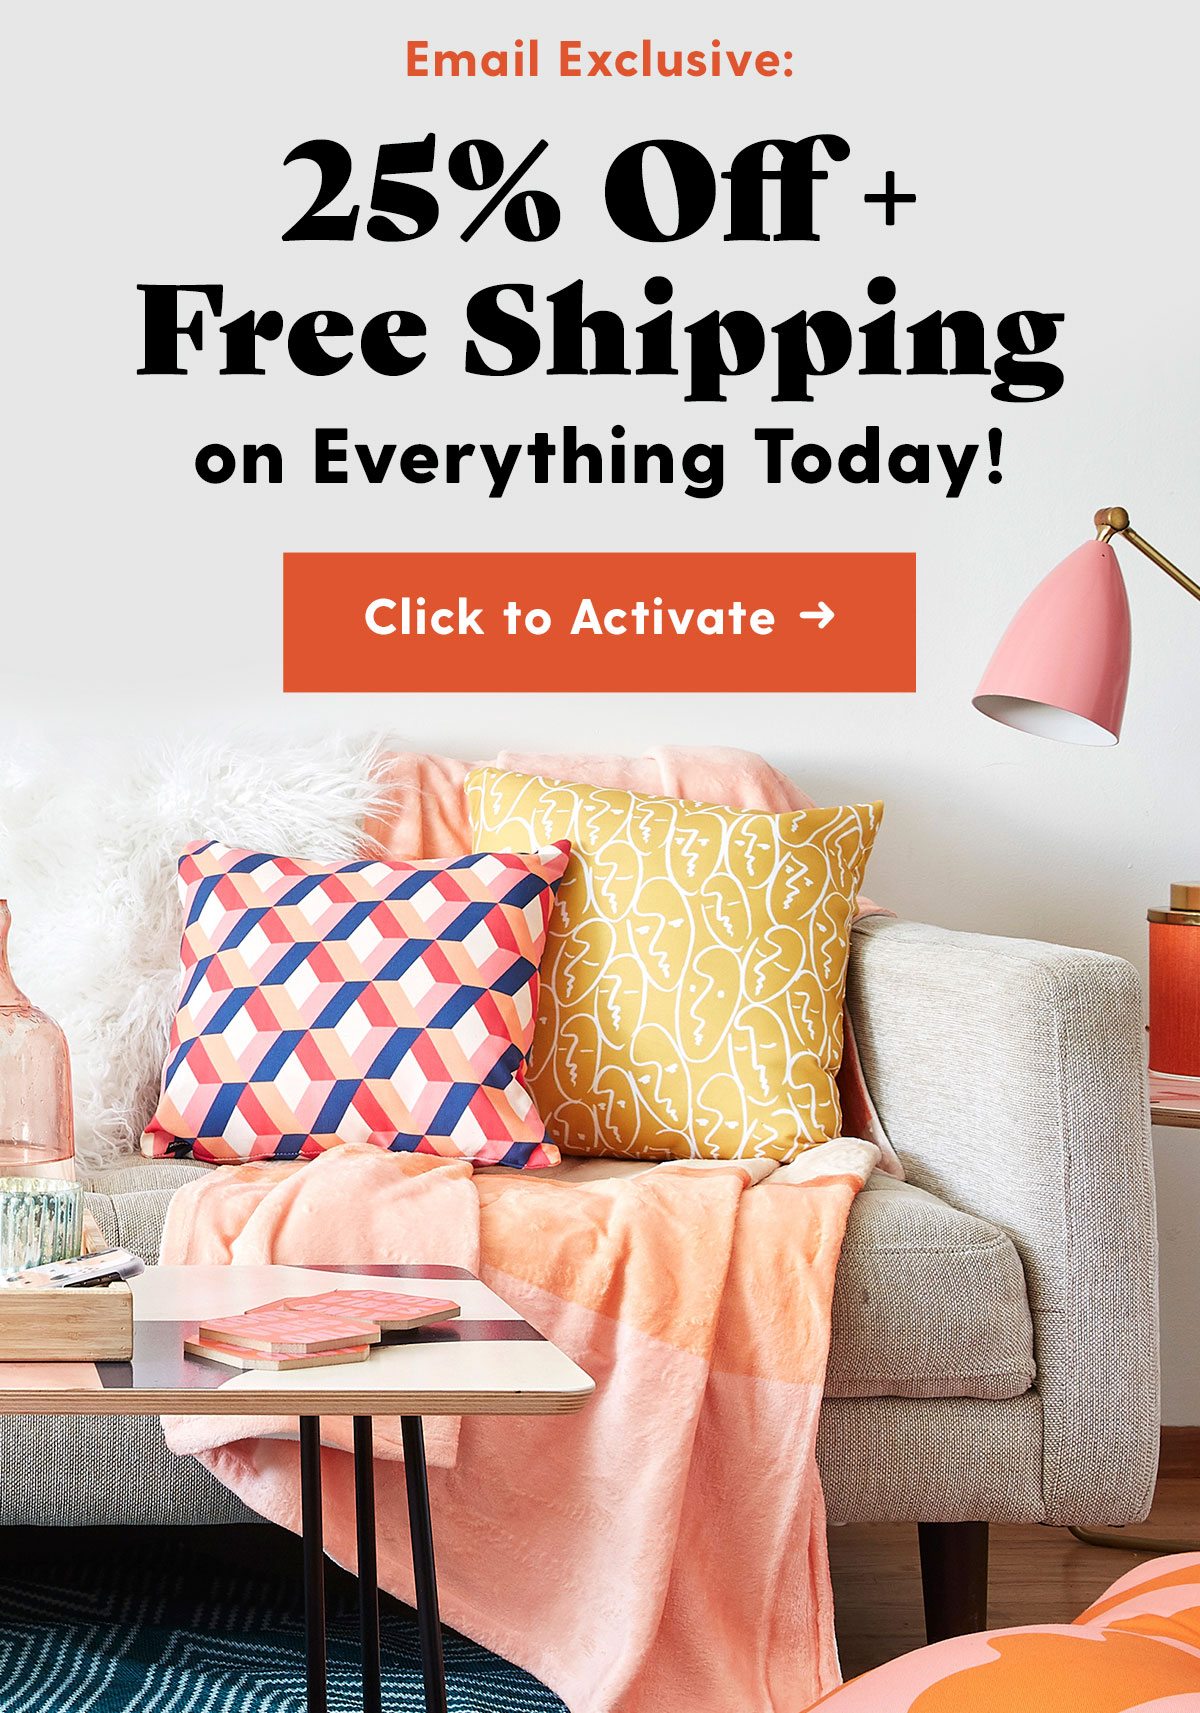 Email Exclusive: 25% Off + Free Shipping on Everything Today! Click to Activate →